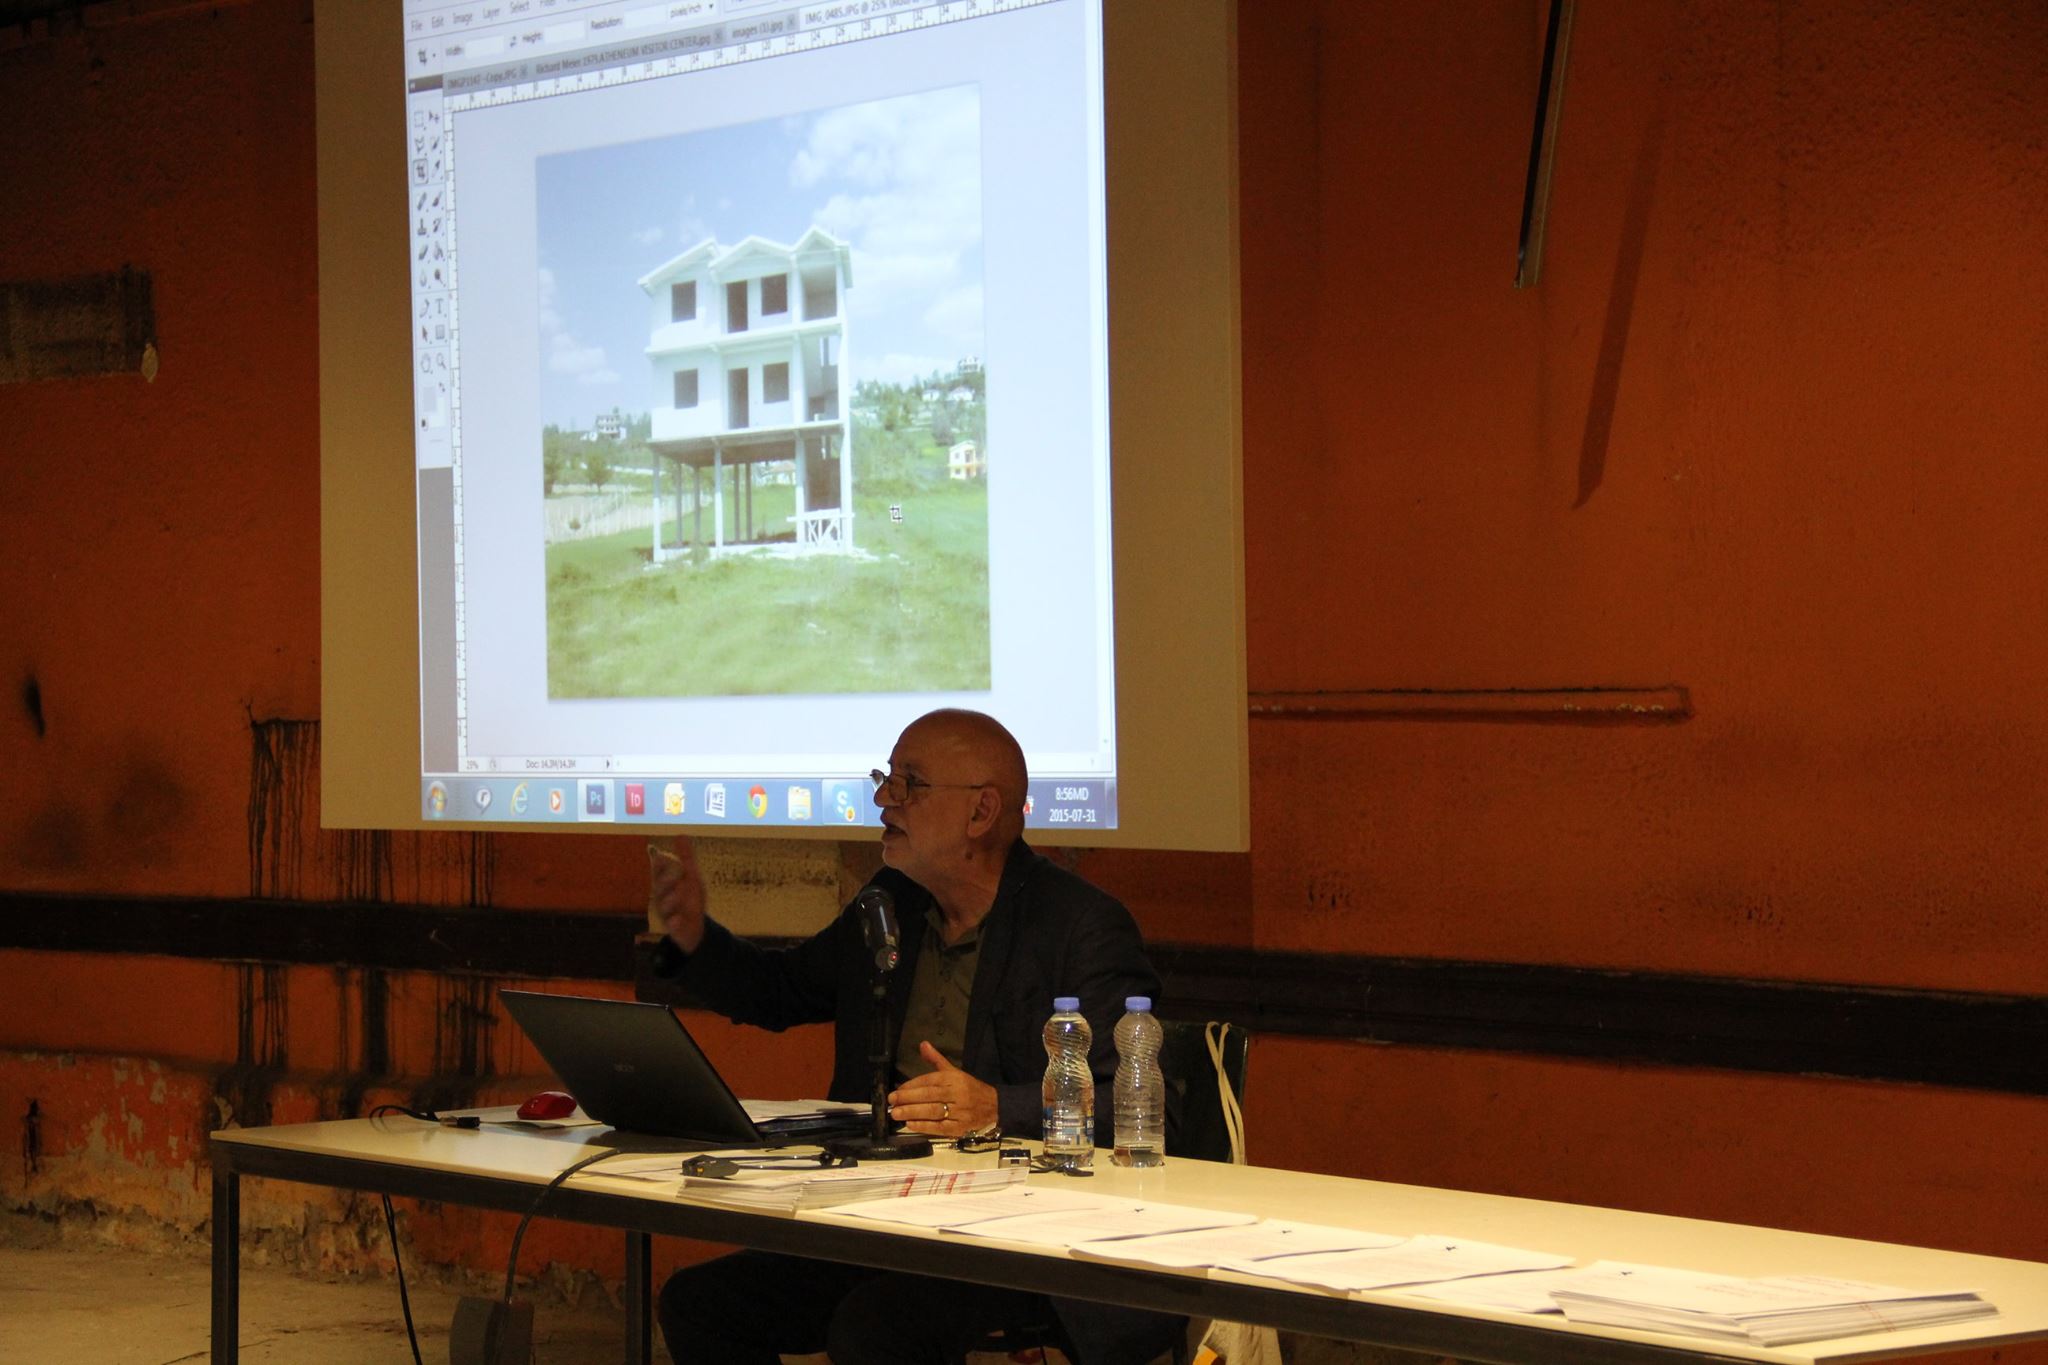 A talk about the project “Penthouse” 2014